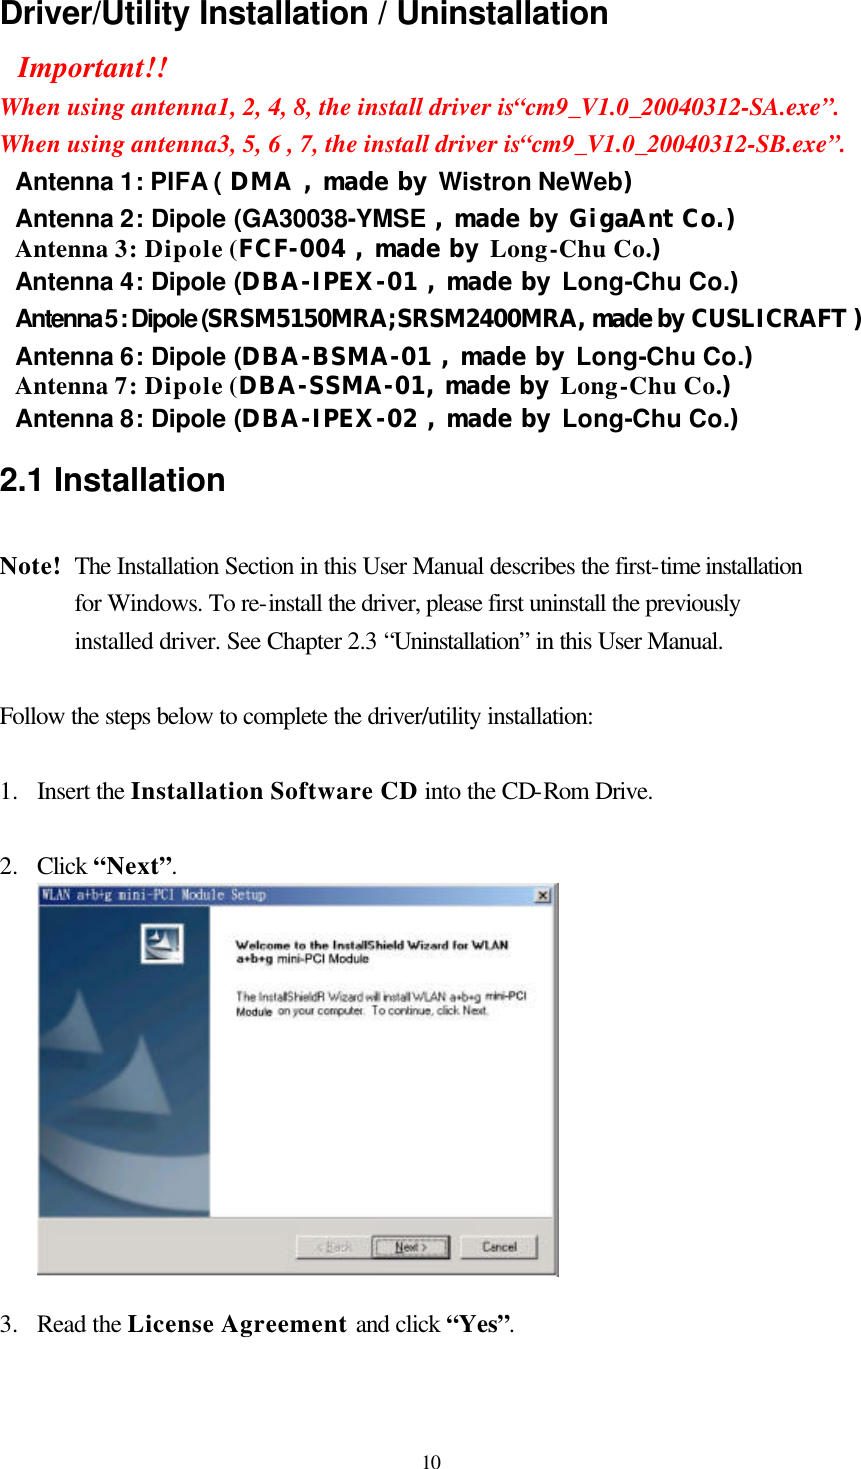  10 Driver/Utility Installation / Uninstallation Important!! When using antenna1, 2, 4, 8, the install driver is“cm9_V1.0_20040312-SA.exe”. When using antenna3, 5, 6 , 7, the install driver is“cm9_V1.0_20040312-SB.exe”. Antenna 1: PIFA ( DMA , made by Wistron NeWeb) Antenna 2: Dipole (GA30038-YMSE , made by GigaAnt Co.) Antenna 3: Dipole (FCF-004 , made by Long-Chu Co.) Antenna 4: Dipole (DBA-IPEX-01 , made by Long-Chu Co.) Antenna 5 : Dipole (SRSM5150MRA;SRSM2400MRA, made by CUSLICRAFT ) Antenna 6: Dipole (DBA-BSMA-01 , made by Long-Chu Co.) Antenna 7: Dipole (DBA-SSMA-01, made by Long-Chu Co.) Antenna 8: Dipole (DBA-IPEX-02 , made by Long-Chu Co.) 2.1 Installation  Note!  The Installation Section in this User Manual describes the first-time installation for Windows. To re-install the driver, please first uninstall the previously installed driver. See Chapter 2.3 “Uninstallation” in this User Manual.  Follow the steps below to complete the driver/utility installation:  1.  Insert the Installation Software CD into the CD-Rom Drive.  2.  Click “Next”.    3.  Read the License Agreement and click “Yes”. 